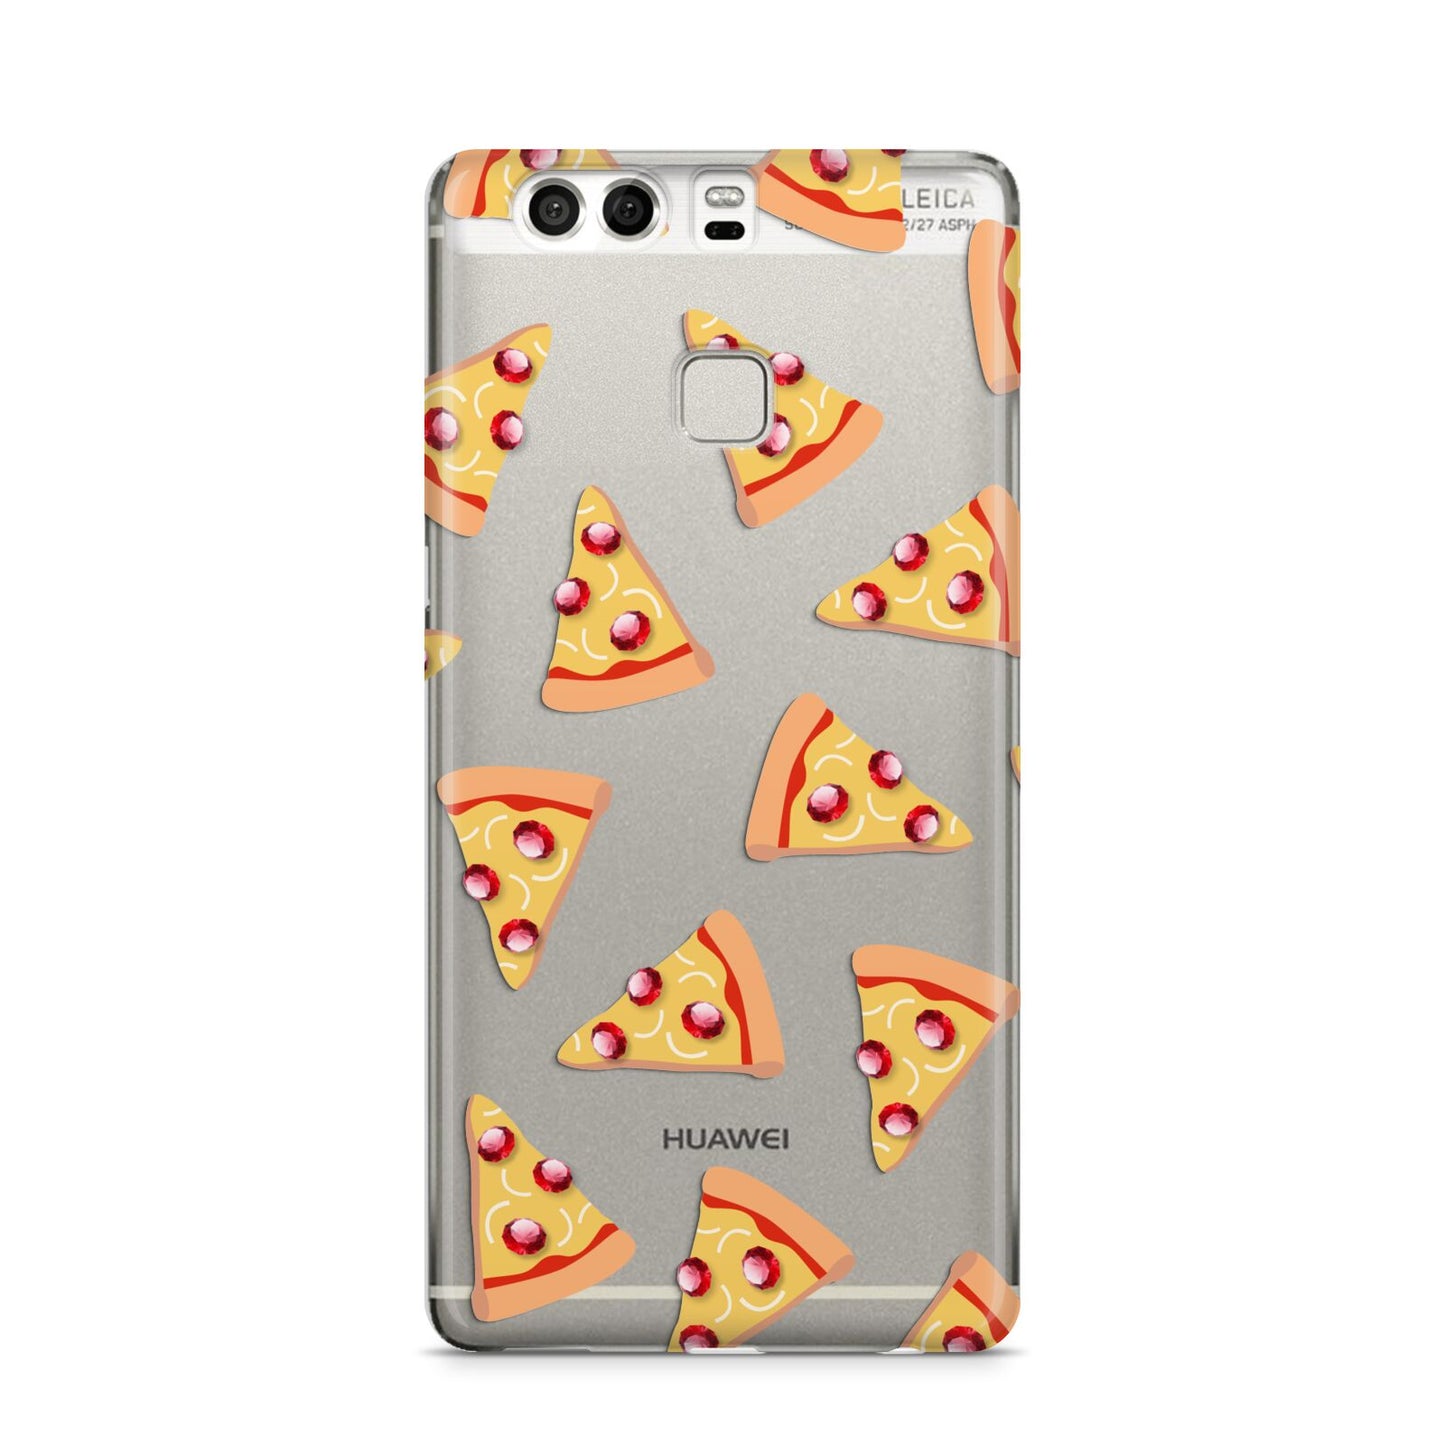 Rubies on Cartoon Pizza Slices Huawei P9 Case